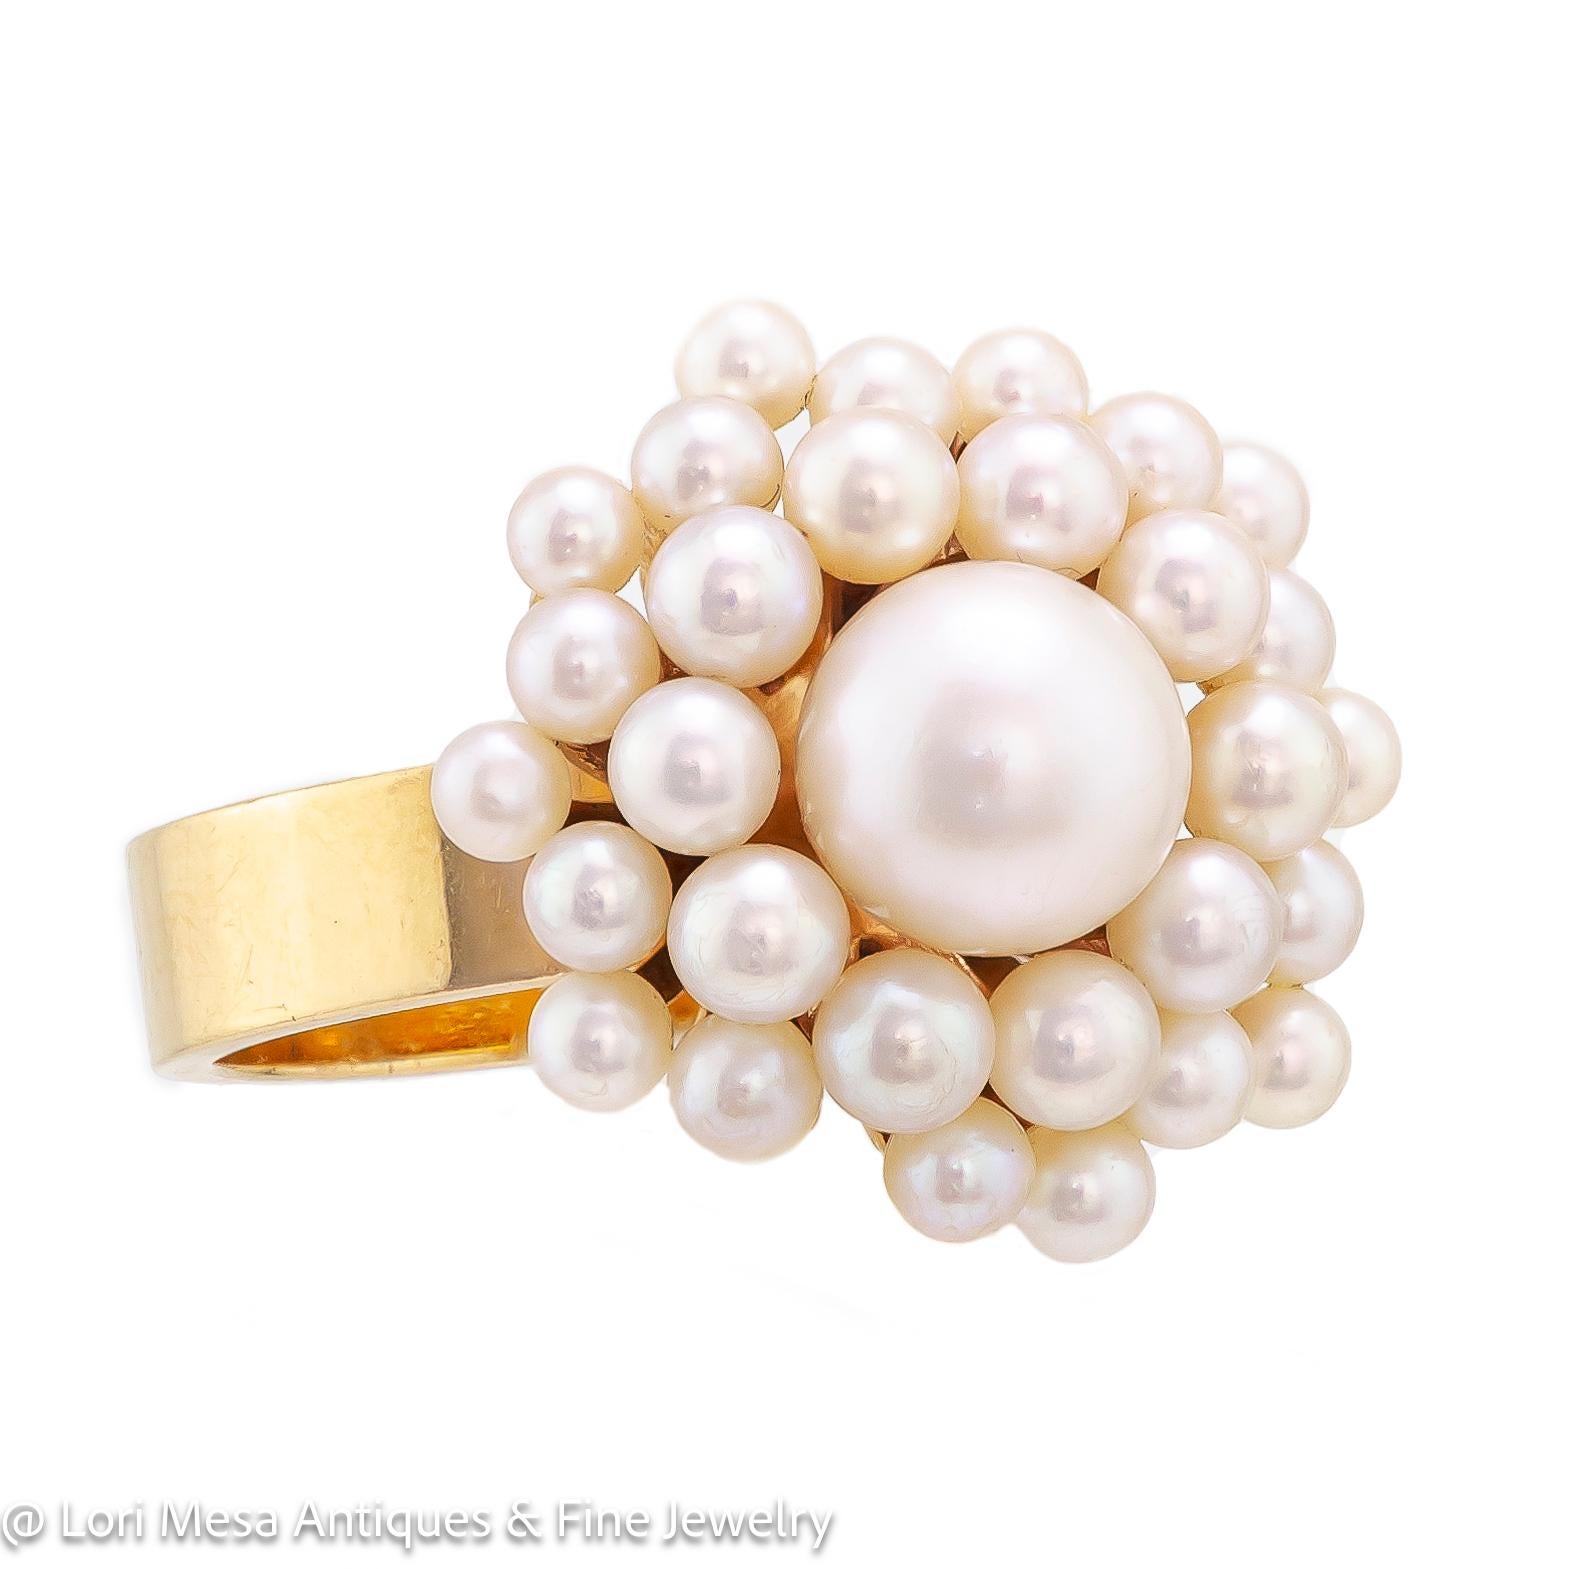 Circa 1960 cultured pearl and yellow gold cluster ring set with one (1) round cultured pearl measuring approximately 7.5mm surrounded by numerous round cultured pearls measuring approximately 3 or 4 mm each all set in a 14kt yellow gold mount of